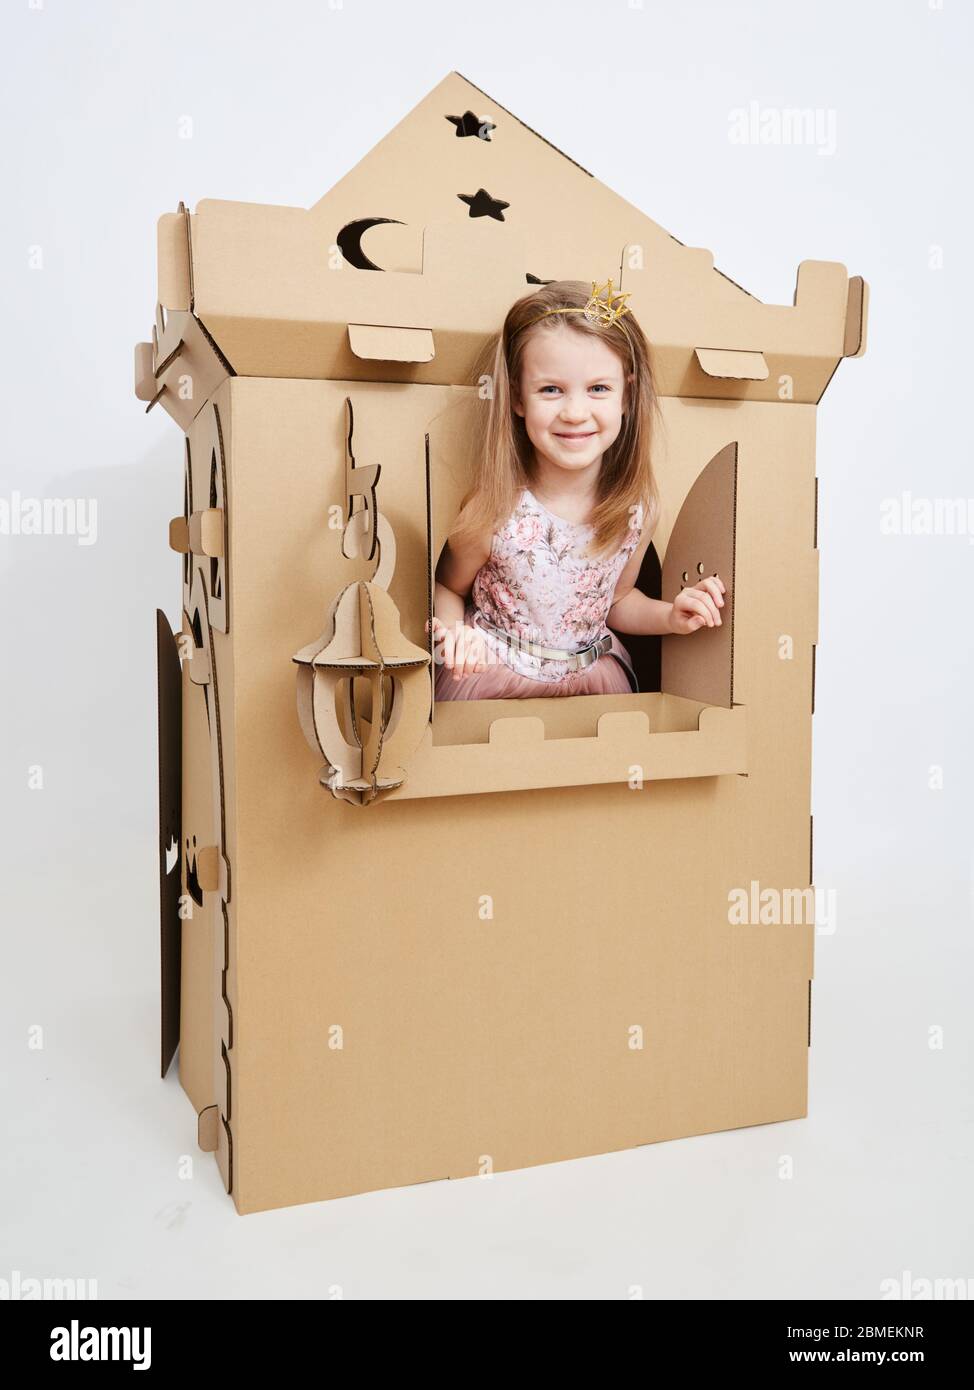 The princess play with cardboard castle tower. Stock Photo